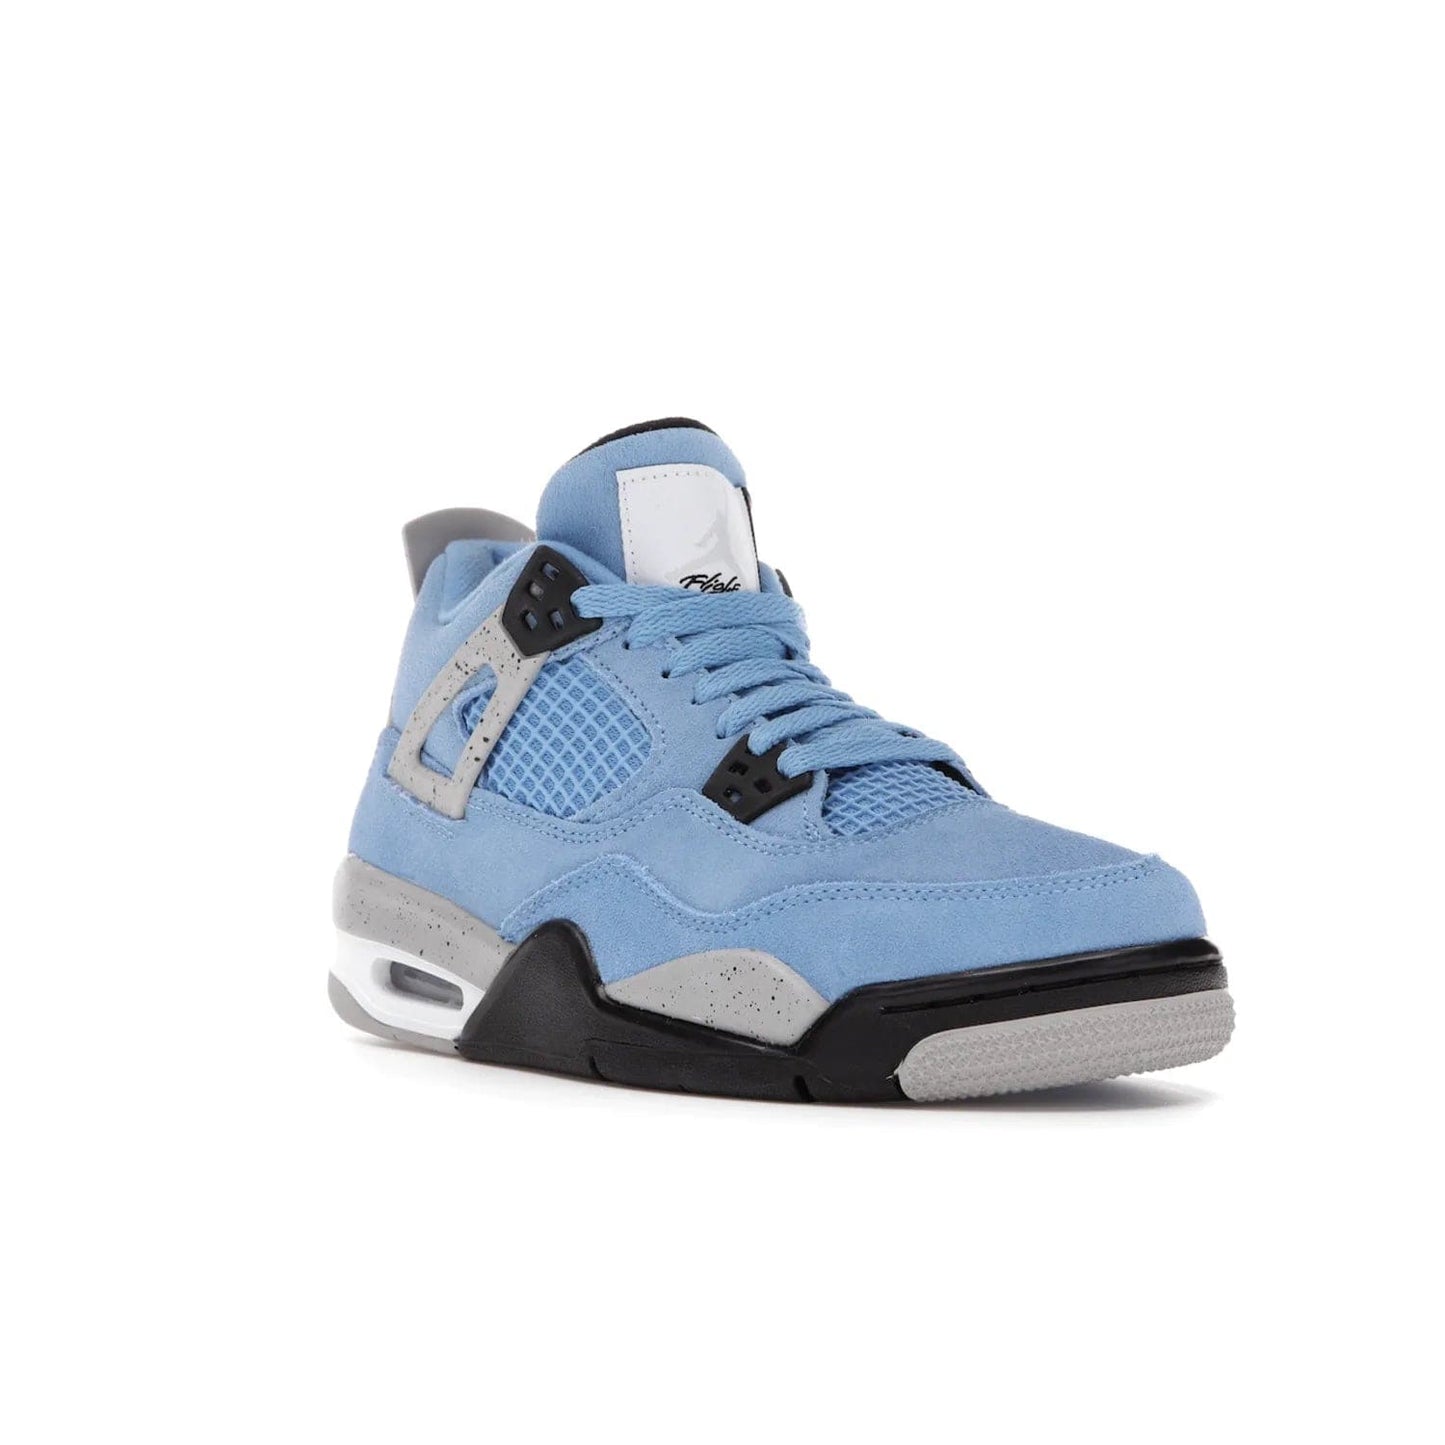 Jordan 4 Retro University Blue (GS) - Image 6 - Only at www.BallersClubKickz.com - Air Jordan 4 Retro University Blue GS: Classic silhouette and vibrant colors. Featuring a suede upper and Jumpman icon, this grade school-size shoe is perfect for collections and retails at $150.